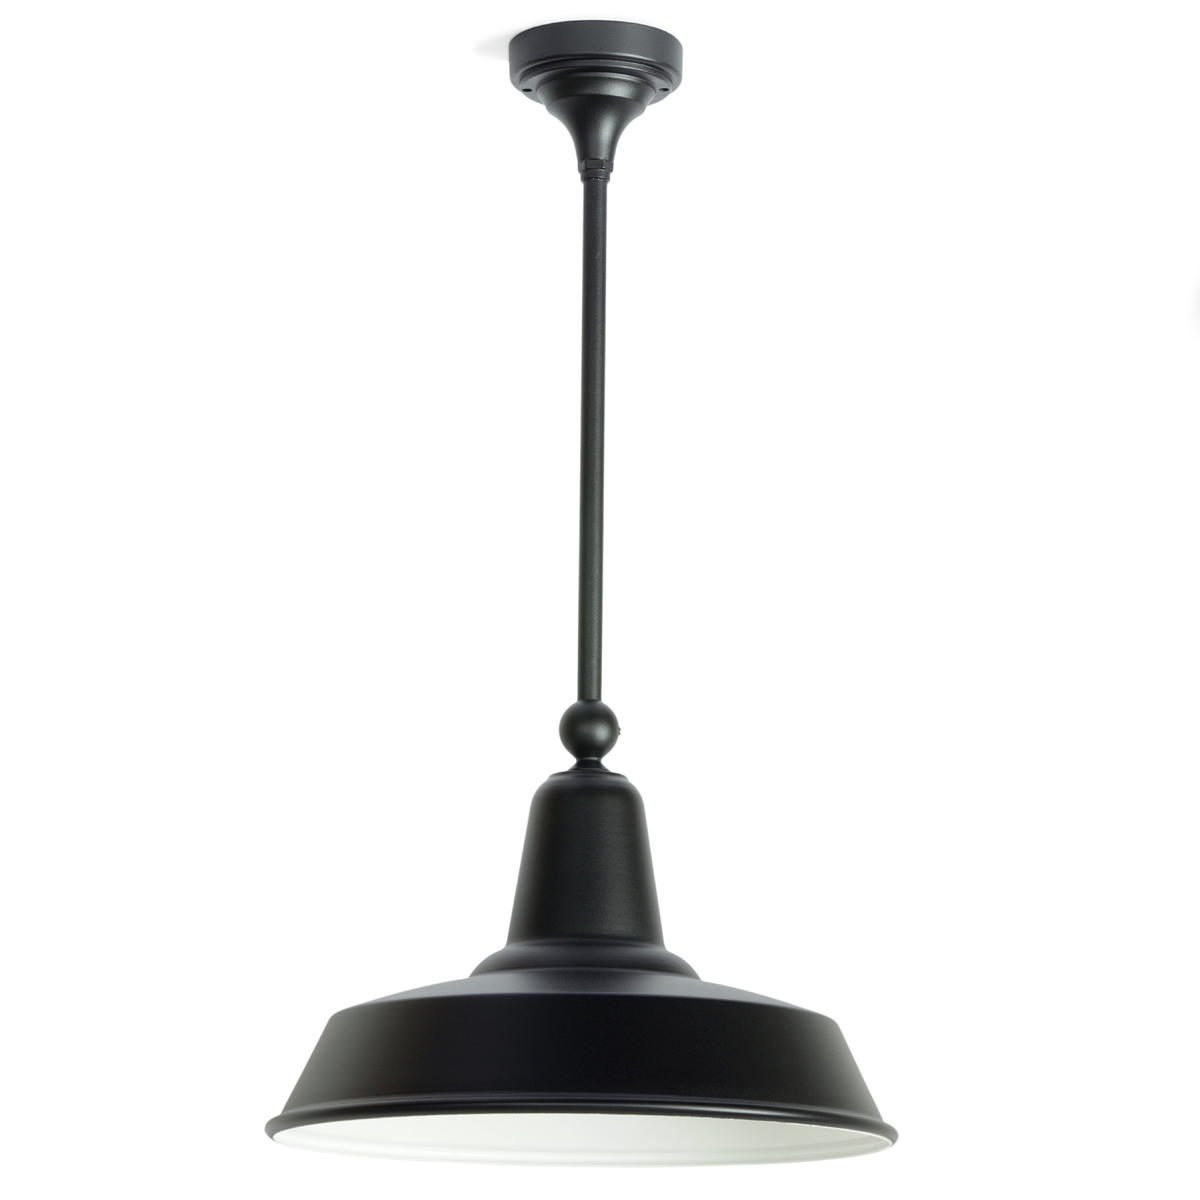 Italian Factory-style Ceiling Light for Outdoors